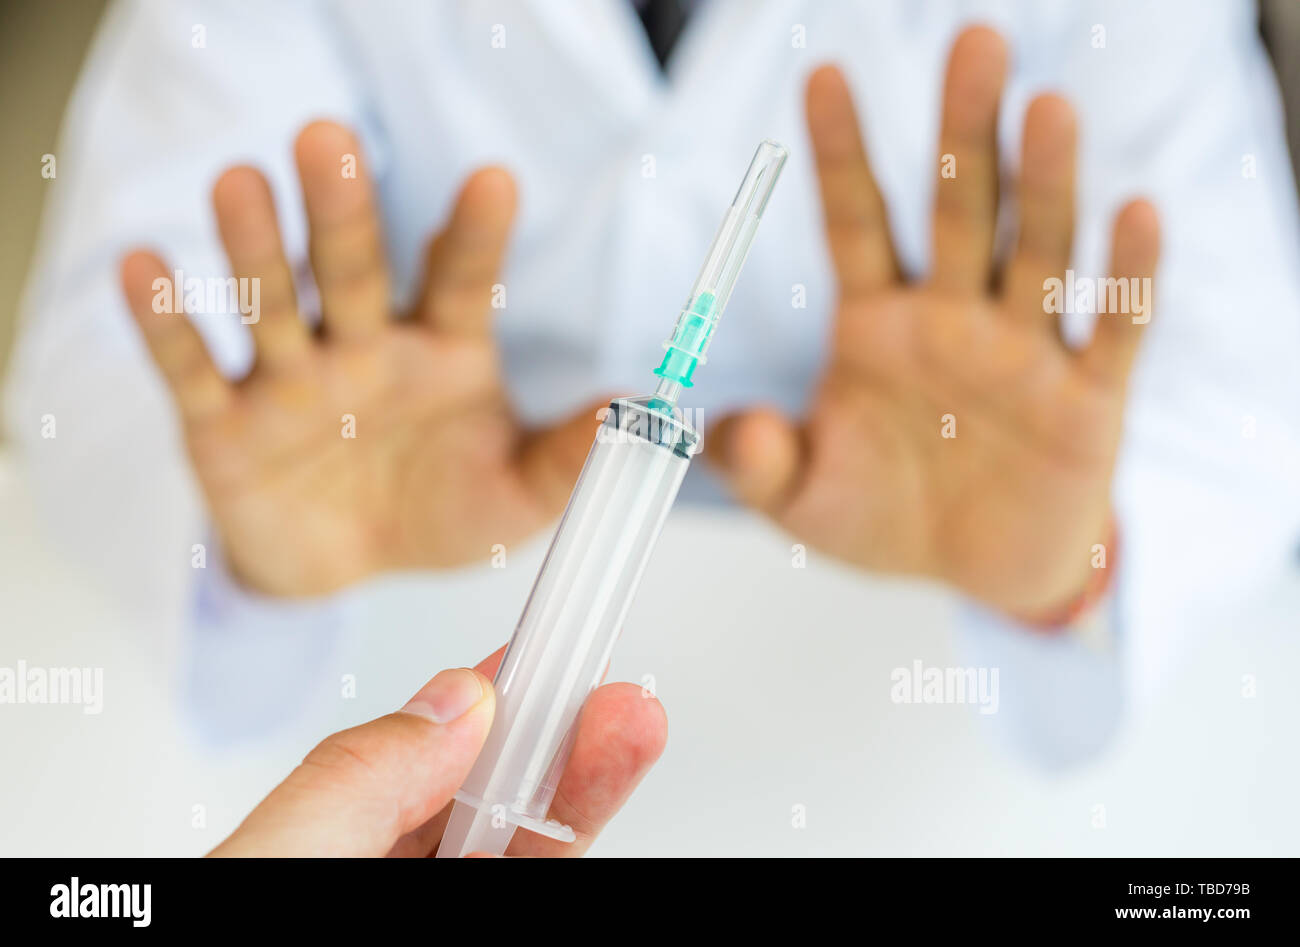 Man gesturing with hand and refusing injection or vaccination Stock Photo